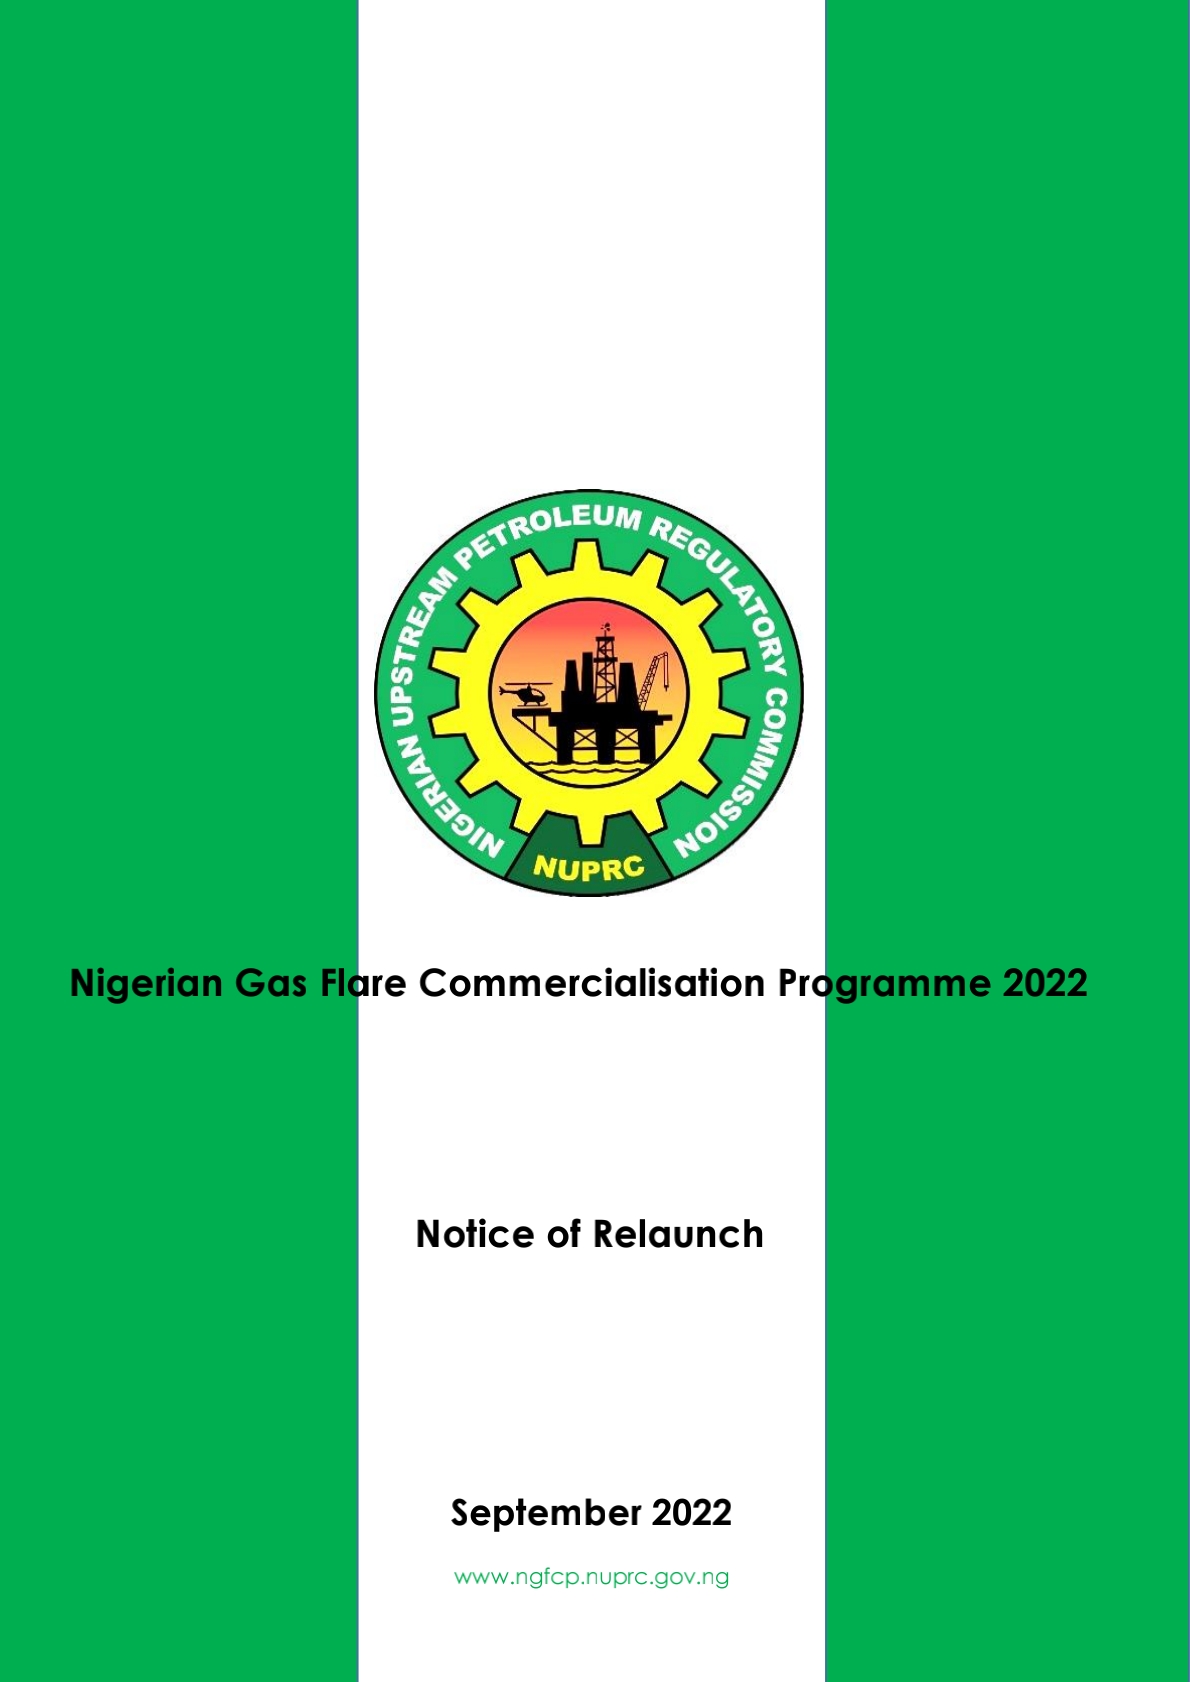 Nigerian Gas Flare Commercialisation Programme: Notice of Relaunch